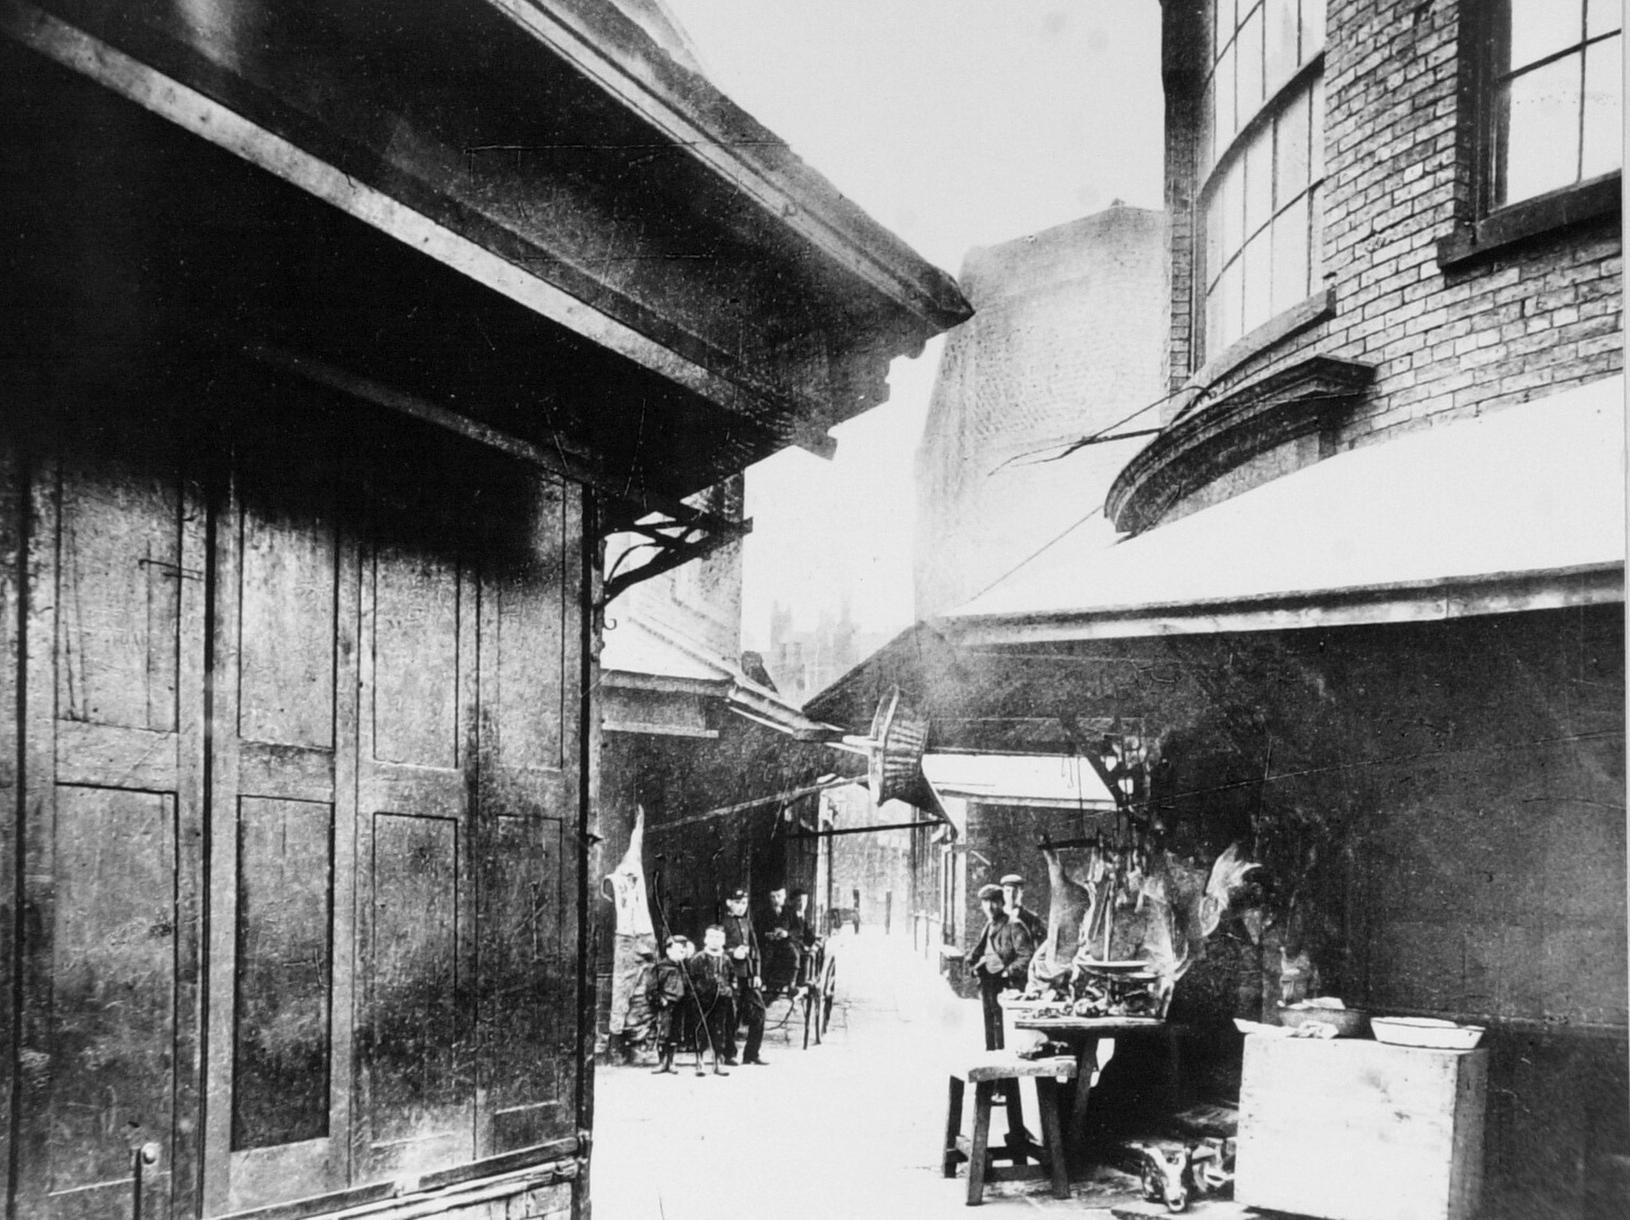 The yard off Shambles and Fish Street in Leeds city centre.